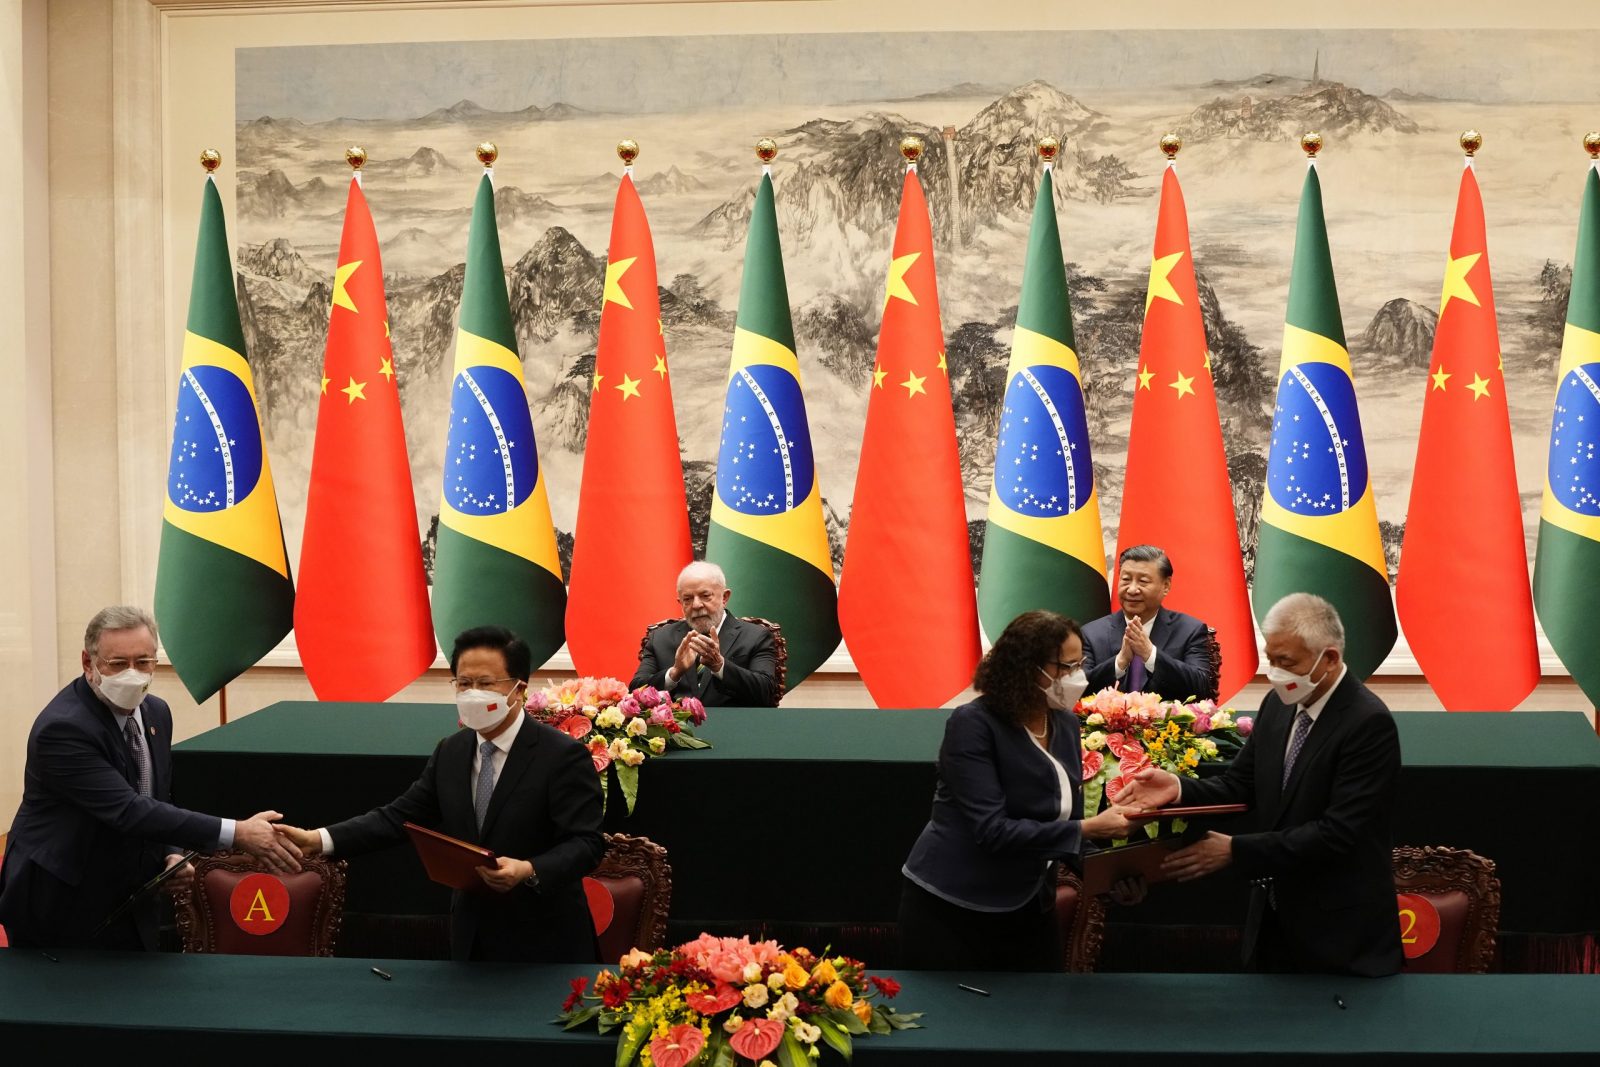 epa10572338 Brazilian President Luiz Inacio Lula da Silva (C-L) and Chinese President Xi Jinping (C-R) applaud during a signing ceremony held at the Great Hall of the People in Beijing, China, 14 April 2023.  EPA/KEN ISHII / POOL